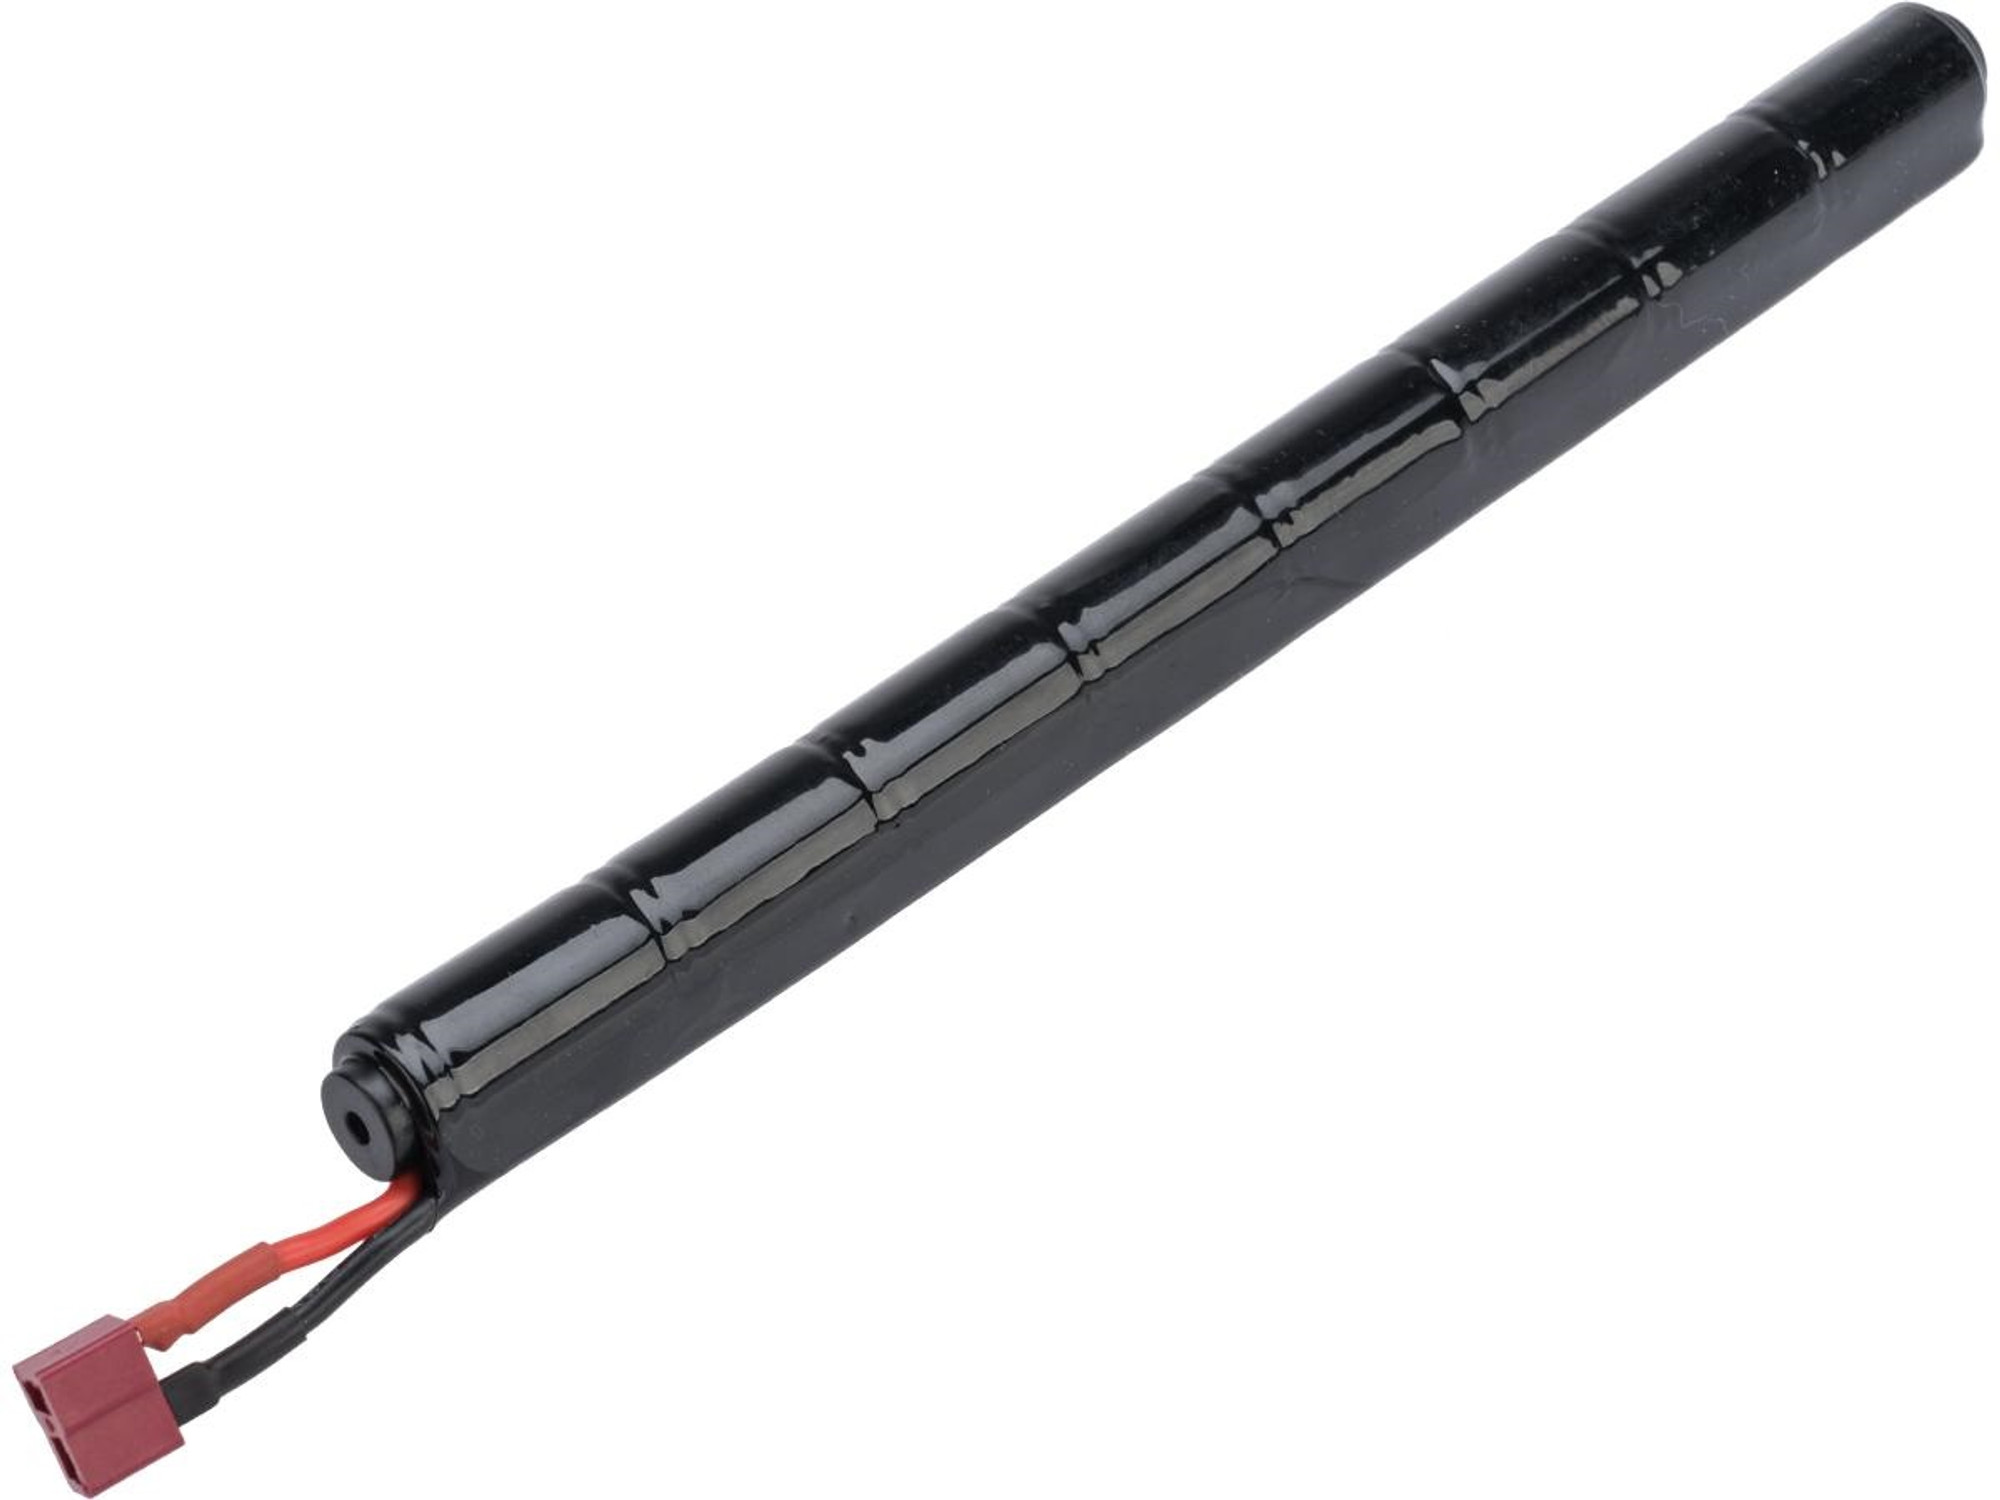 Matrix NiMH Stick Type Airsoft Battery for Airsoft AEGs (Configuration: 9.6v 1600mAh / Deans)